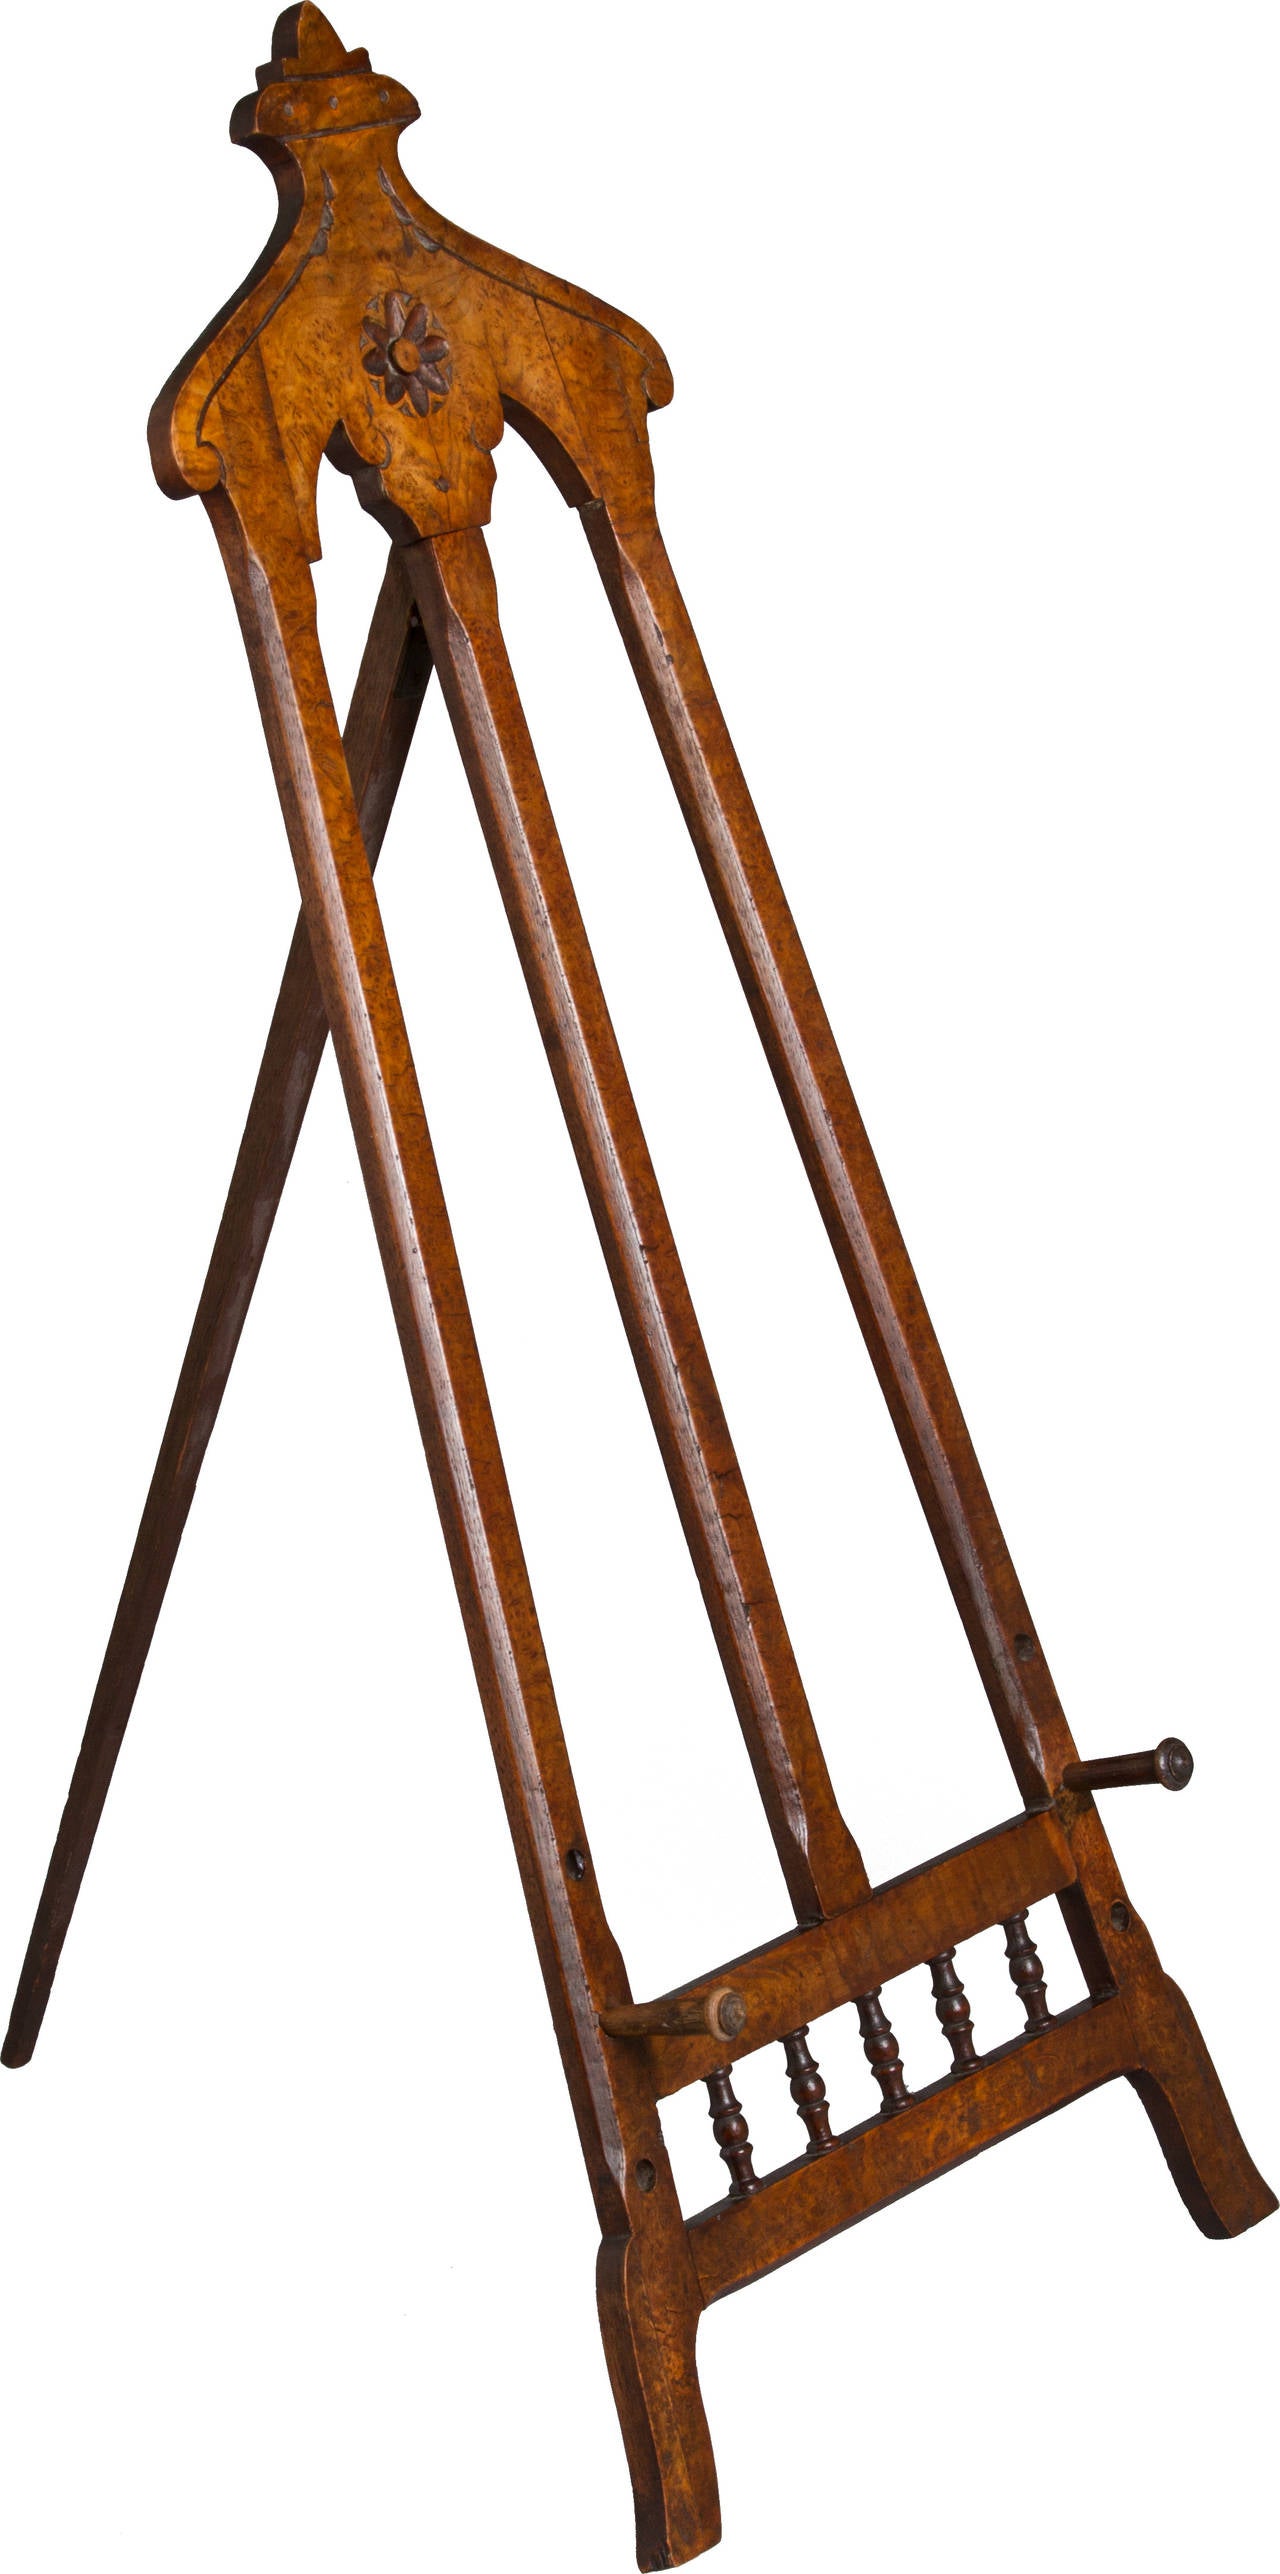 Unusual hand-carved Aesthetic Movement easel with adjustable pegs. This is a nice table top easel.